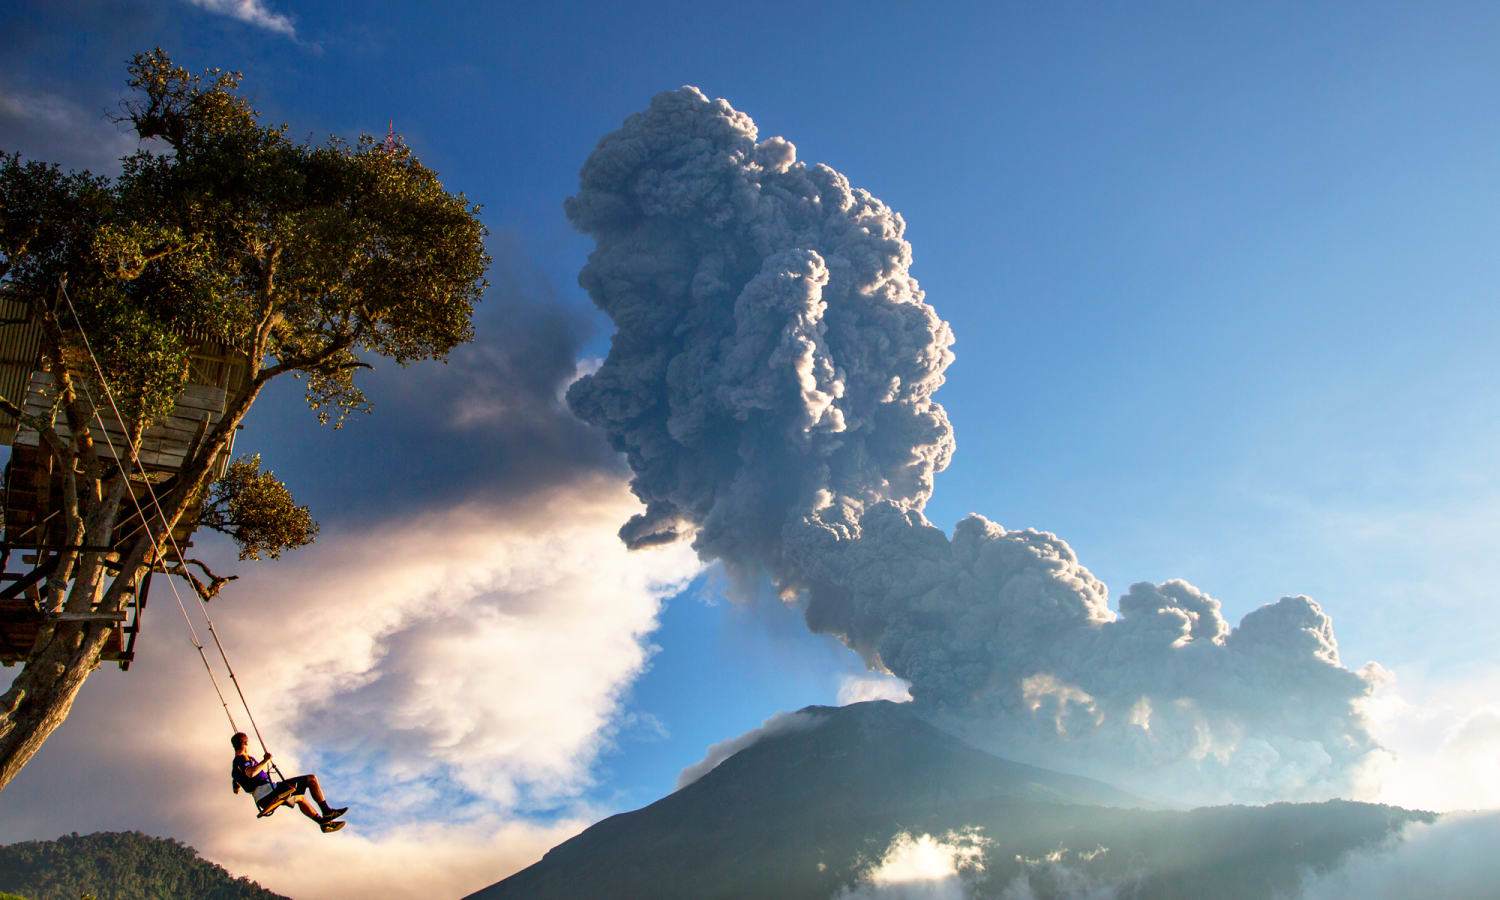 Photo gallery: Who in the world would live next to an active volcano? Meet the neighbors